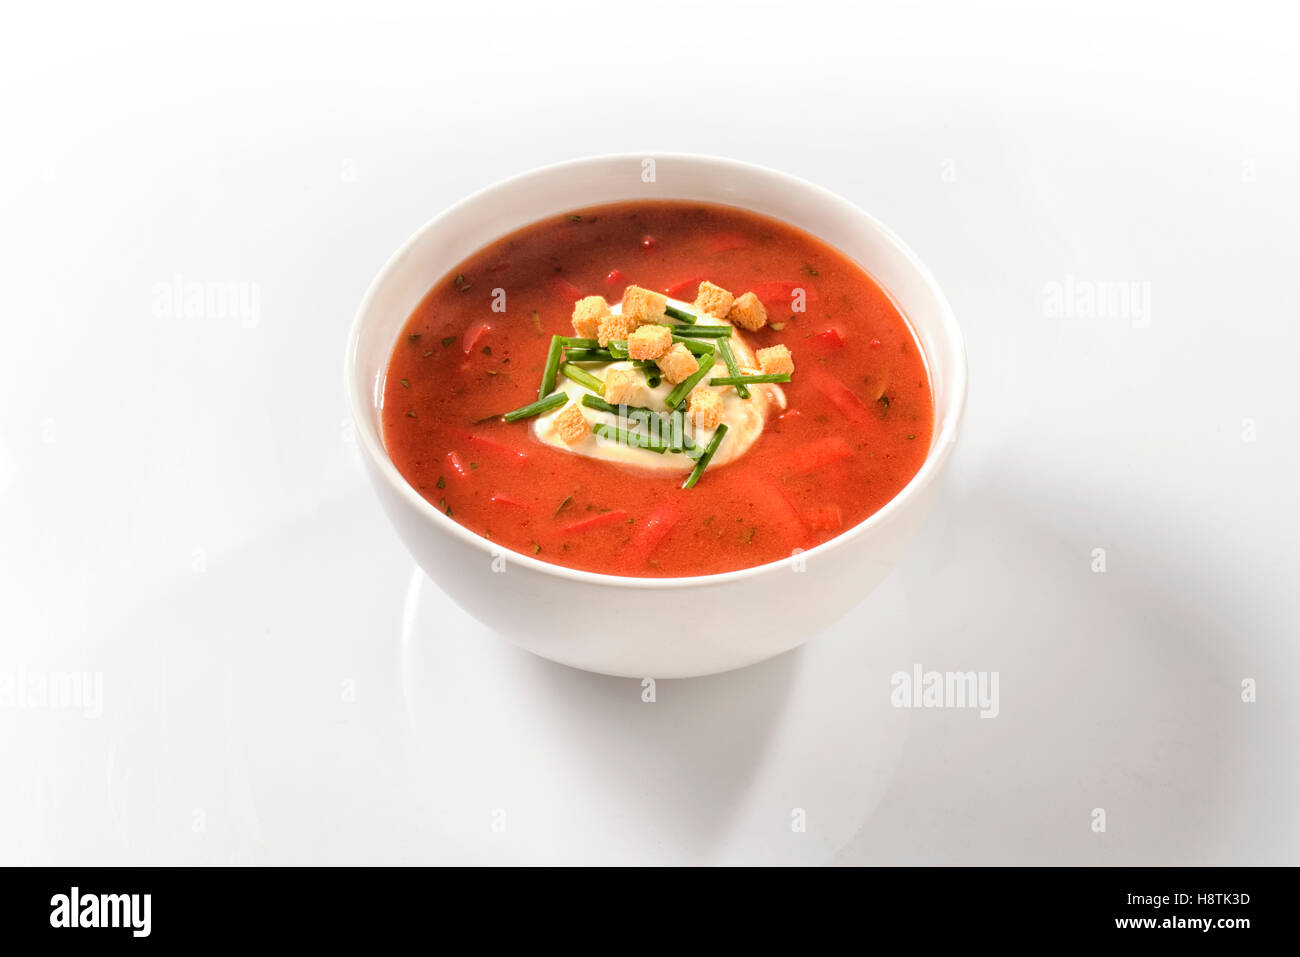 Sweet pepper soup with peppers and sour cream in a white porcelain cup Stock Photo